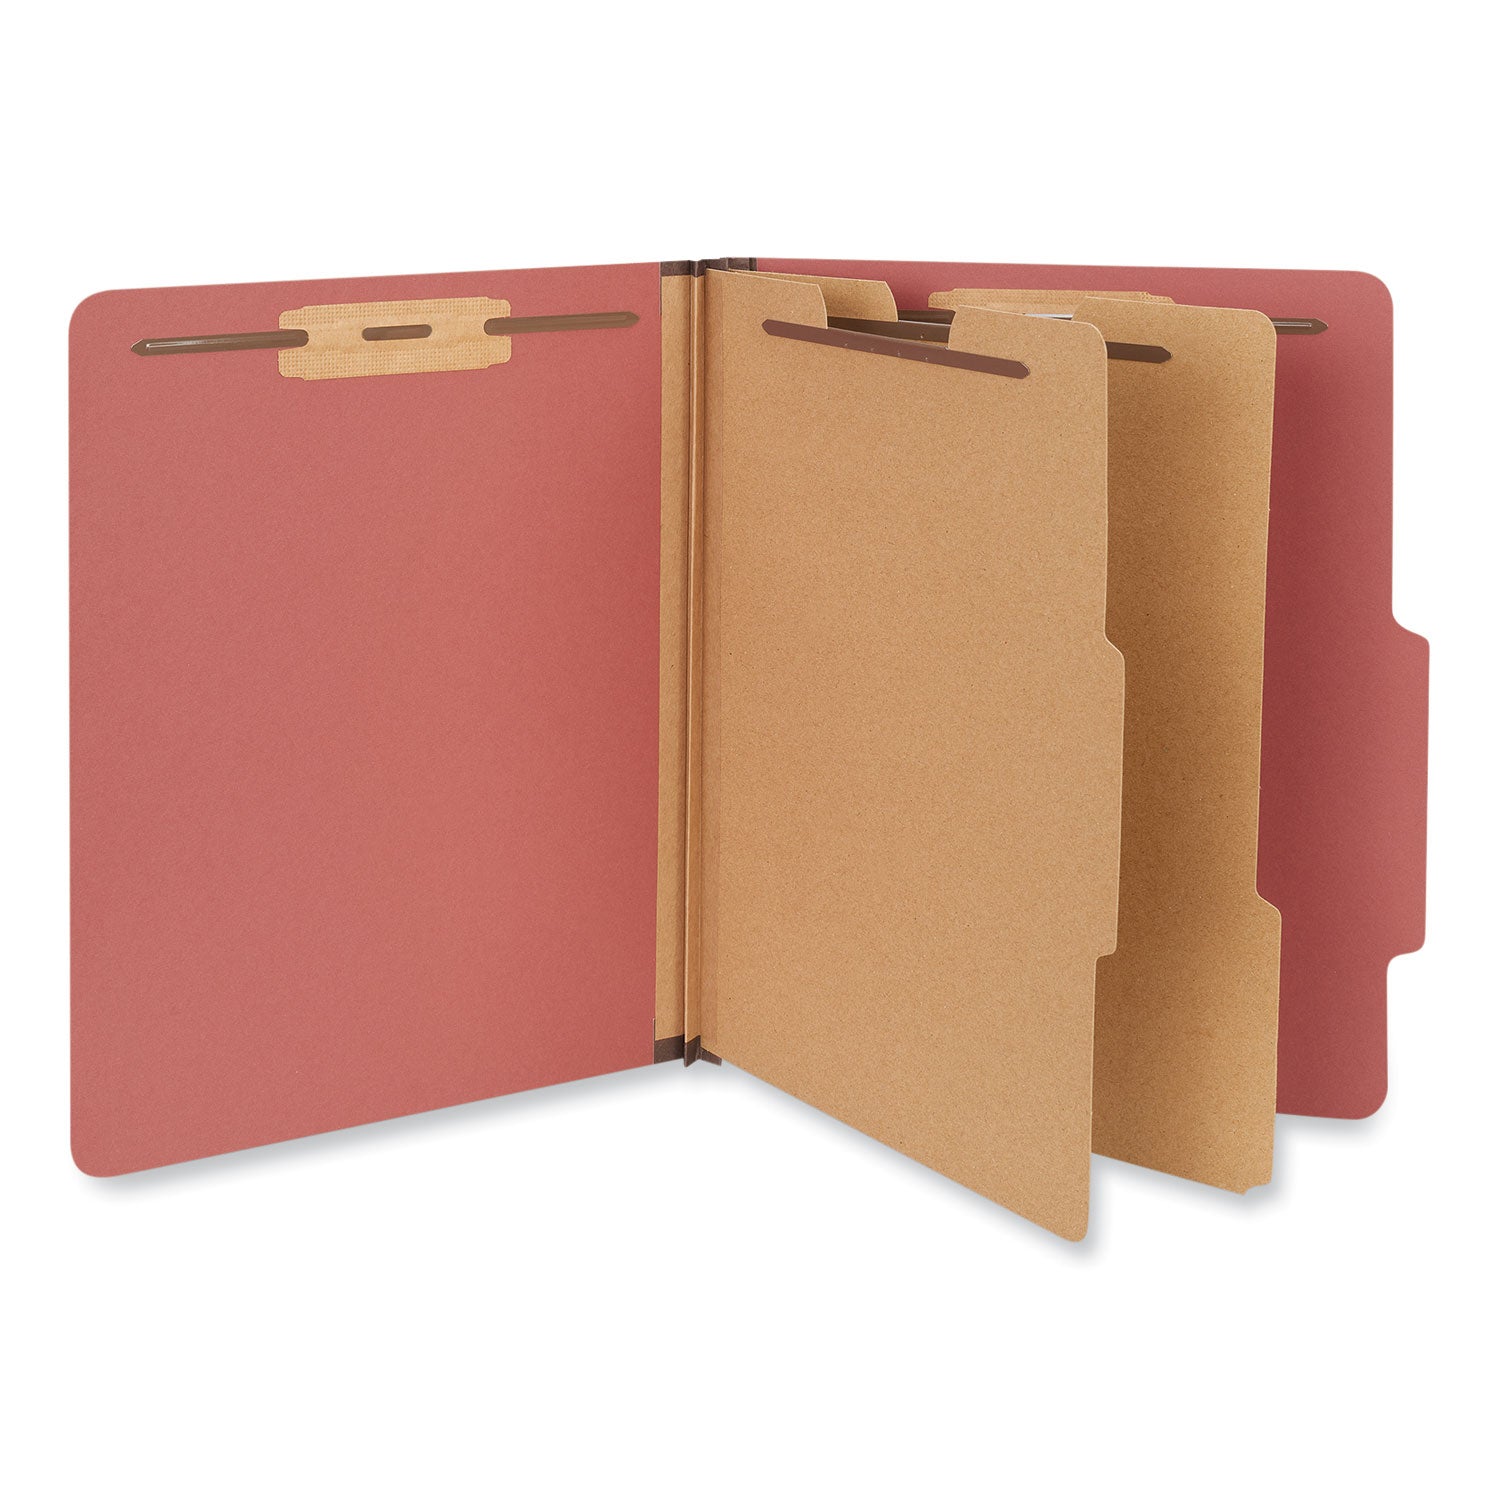 six-section-classification-folders-heavy-duty-pressboard-cover-2-dividers-6-fasteners-letter-size-brick-red-20-box_unv10408 - 2